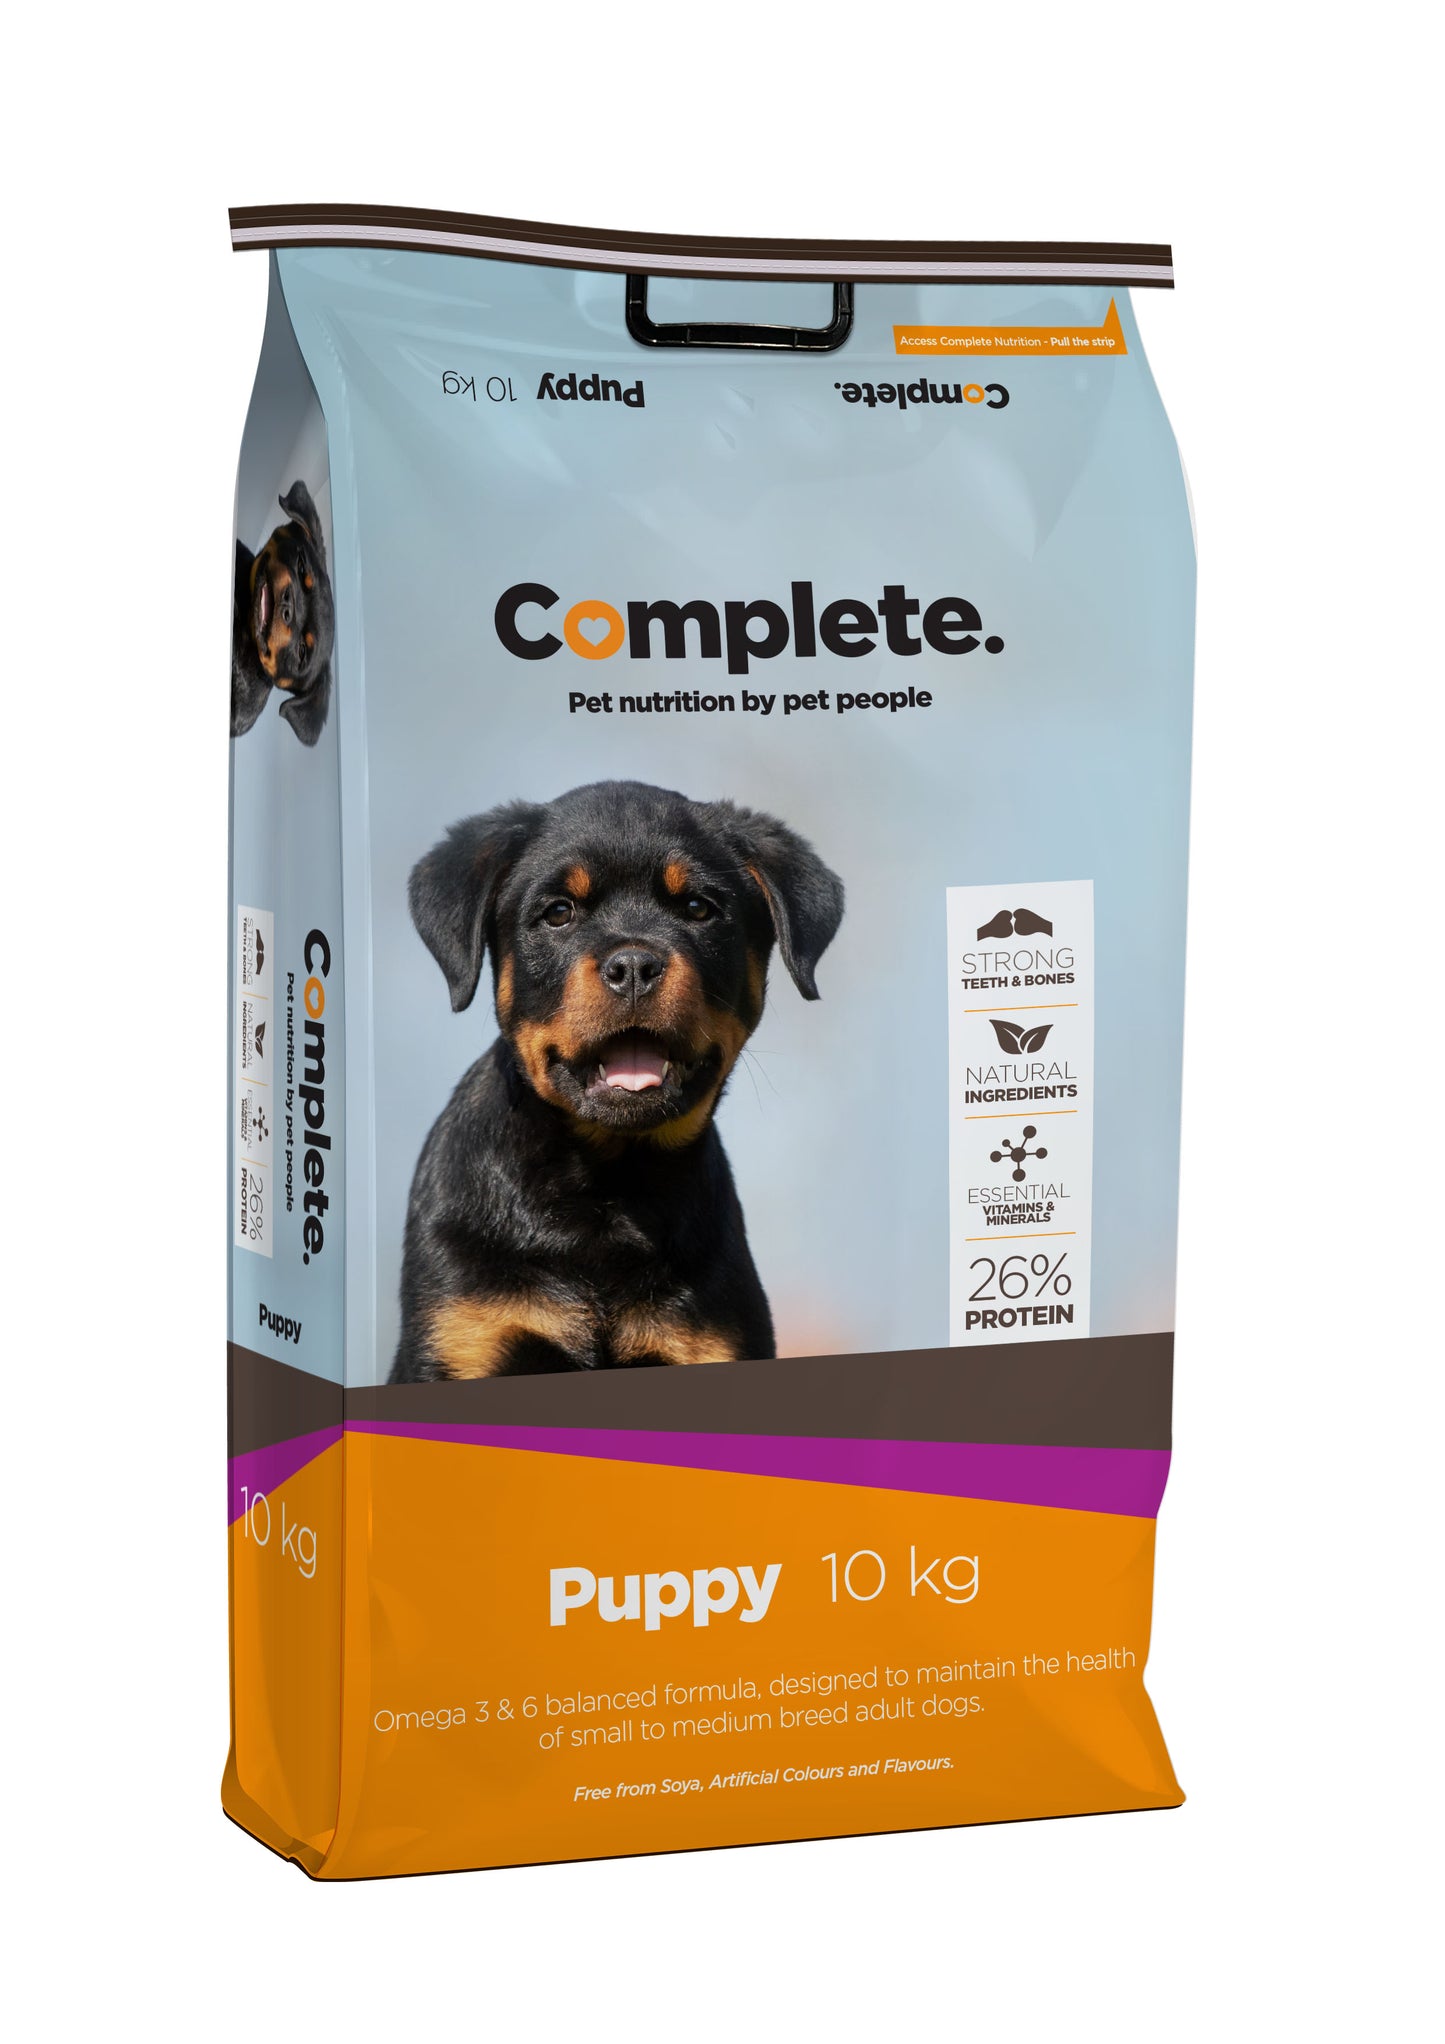 Puppy 10kg Complete Pet Food For Large to Giant breed puppies from Pets Planet - South Africa’s Best Online Pet Store for premium pet products, best pet store near me, Dog food, puppy food, dog food for puppies, pet food, dog wet food, dog bed, dog beds, washable dog bed, takealot dog bed, Complete Pet Nutrition, Complete pet nutrition dog food, hills dog food, optimizor dog food, royal canin dog food, jock dog food, bobtail dog food, canine cuisine, acana dog food, best dog food